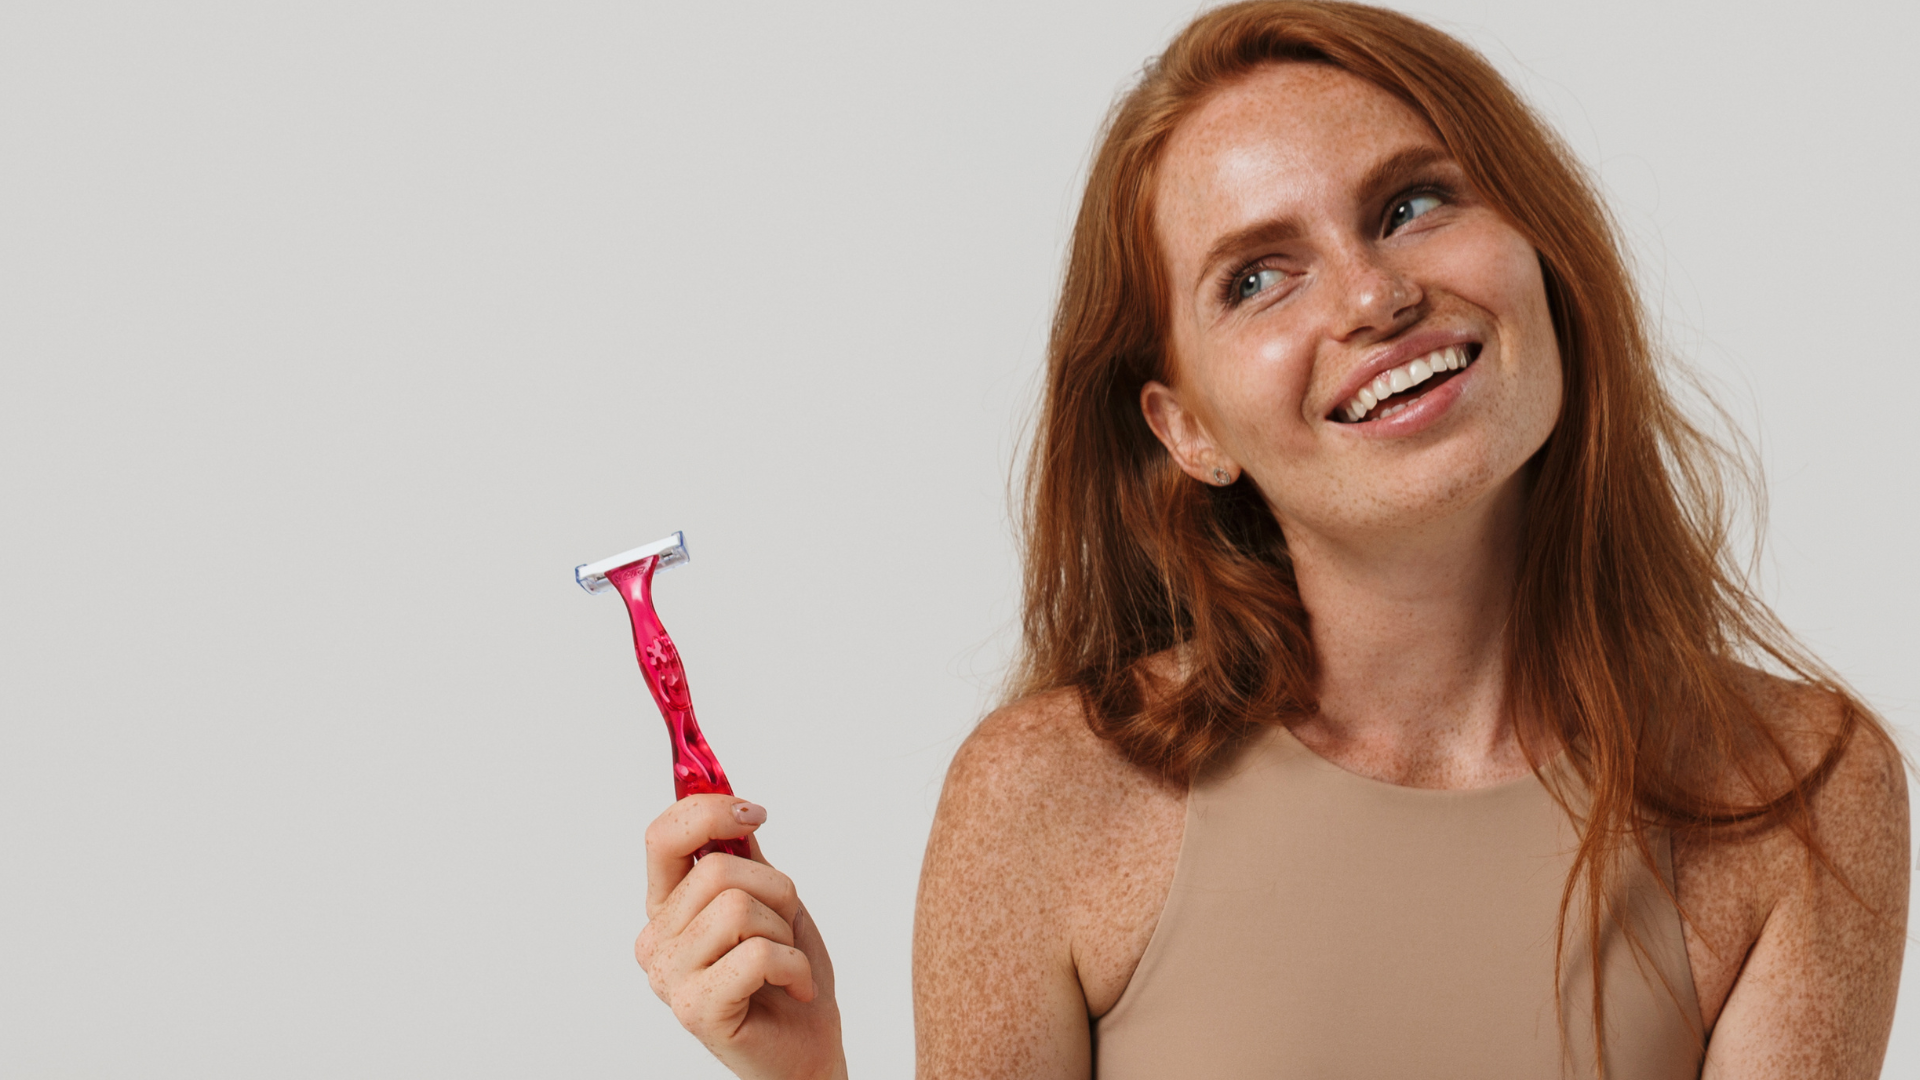 How Often Should Redheads Change Their Razors?